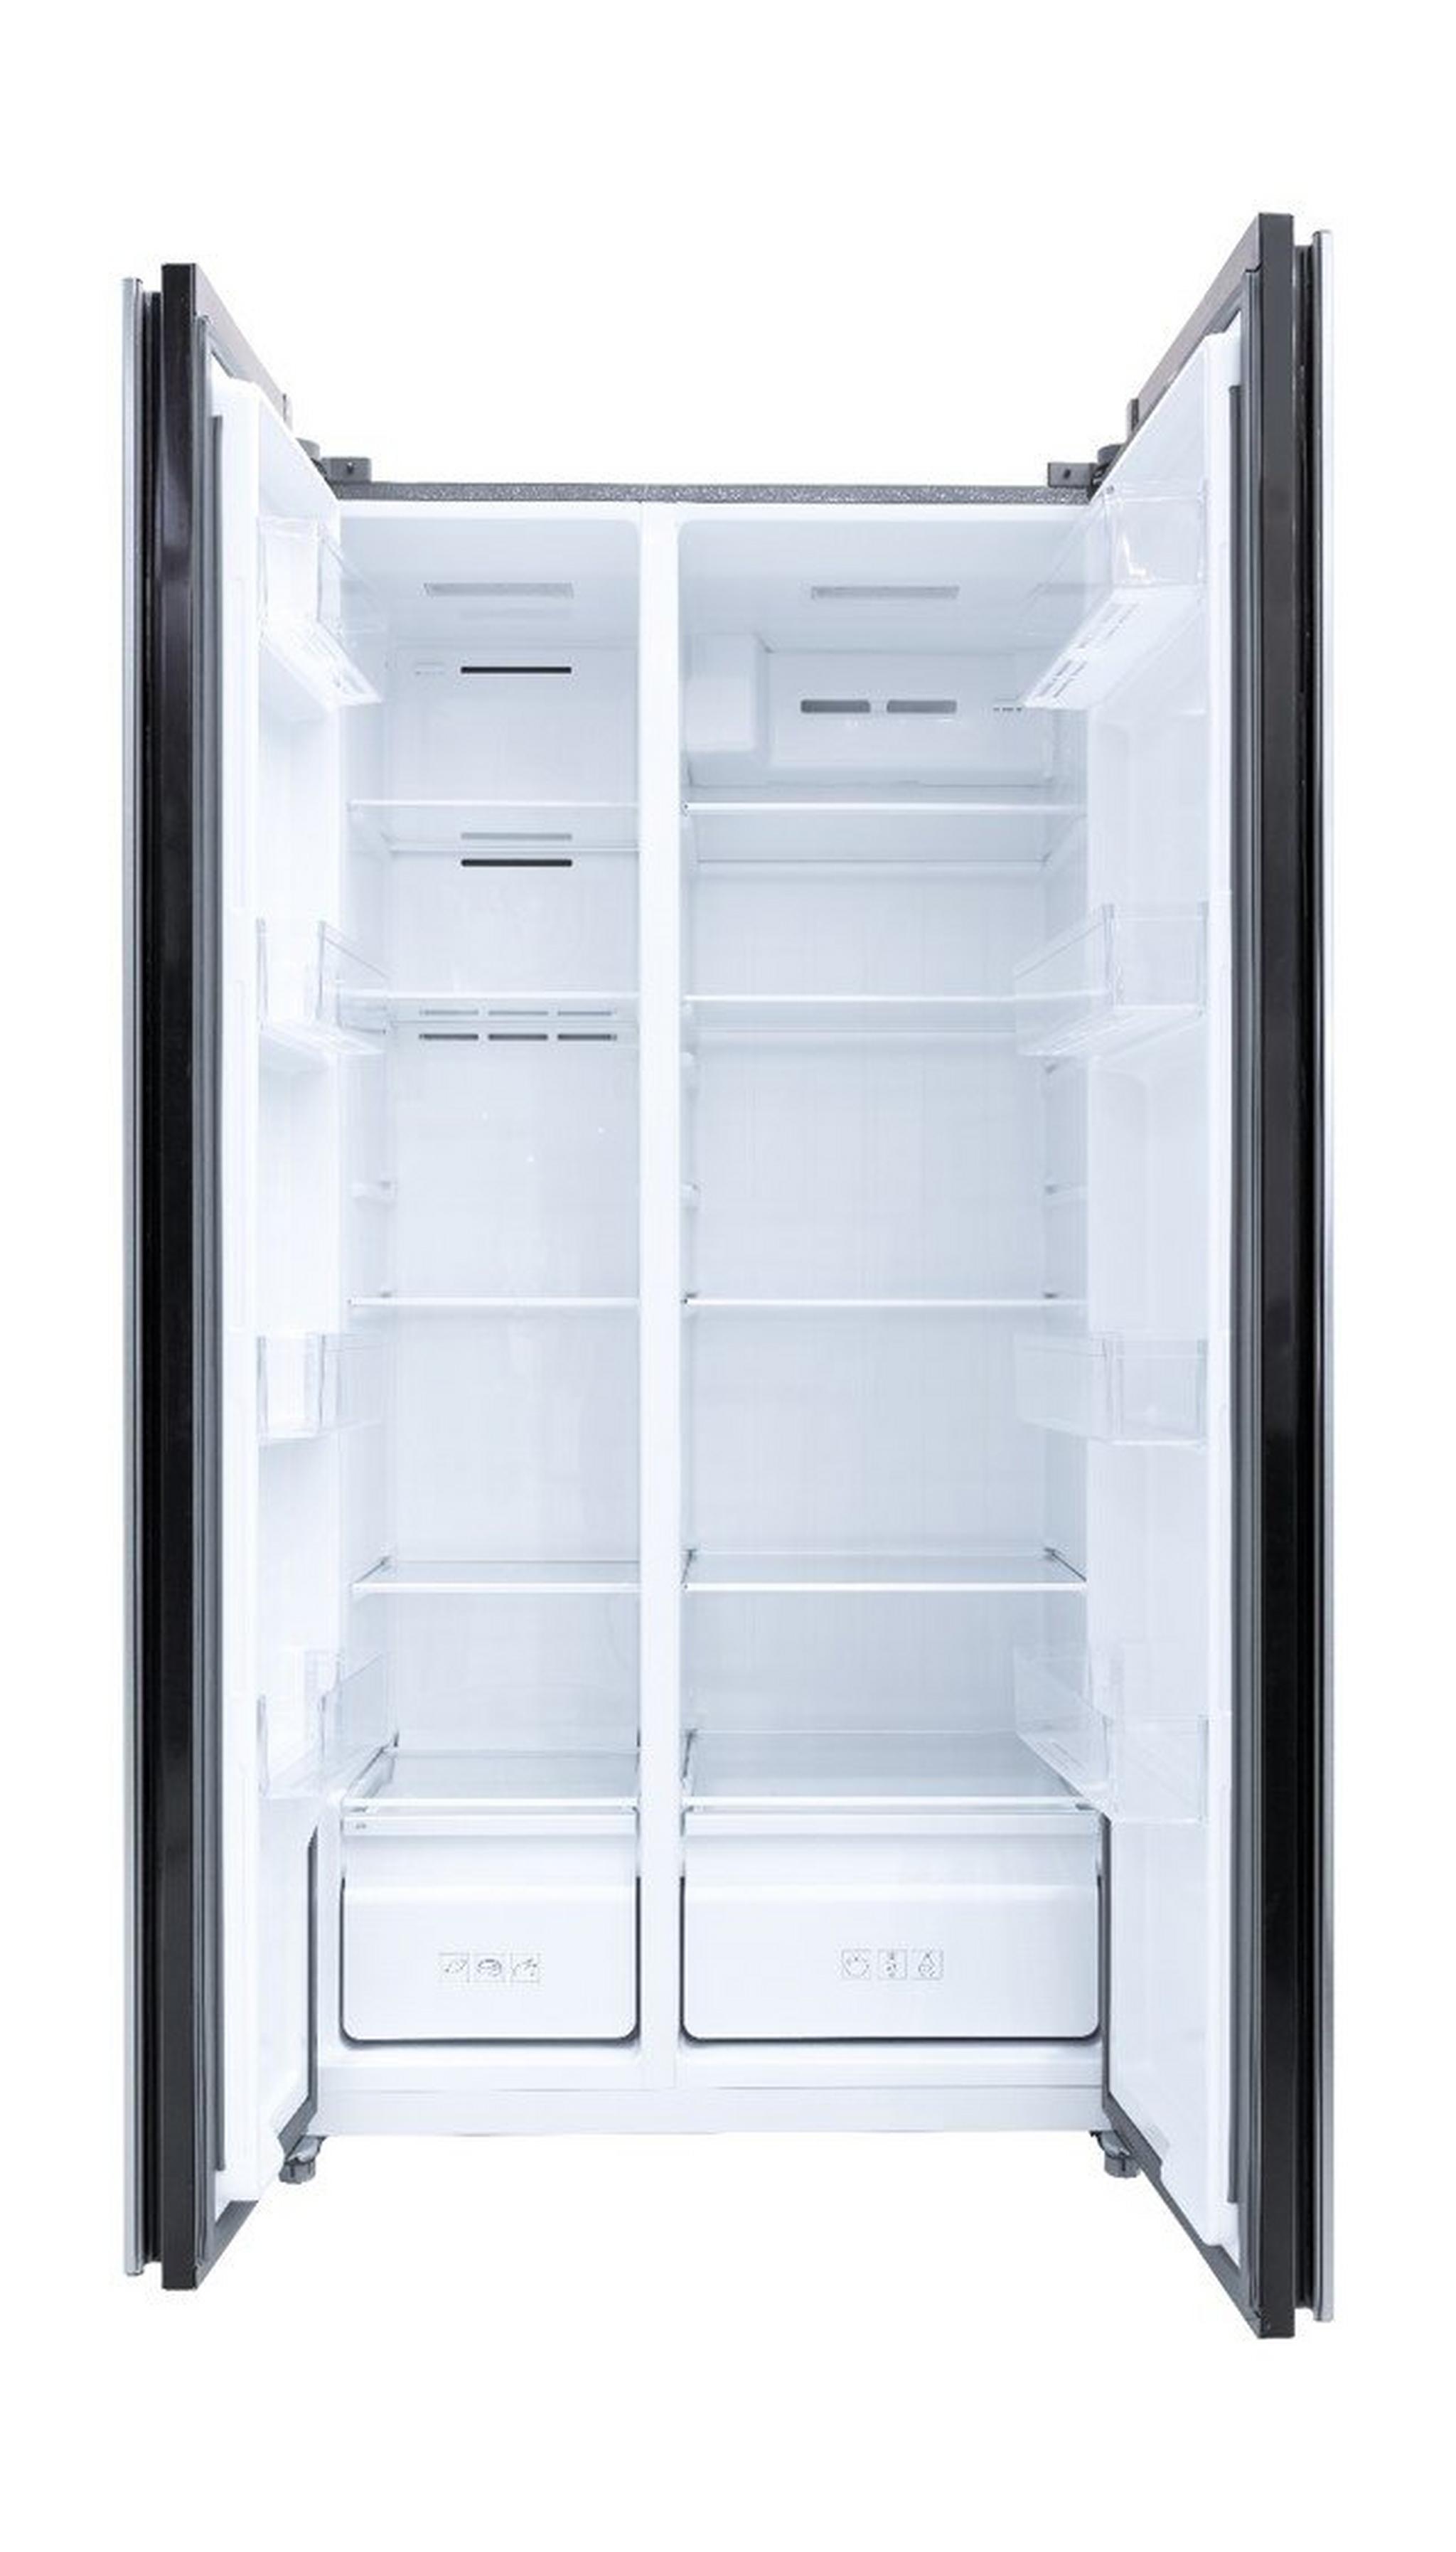 TCL Side By Side Refrigerator and Freezer 17 CFT (TRF-520WEX) - Stainless Steel